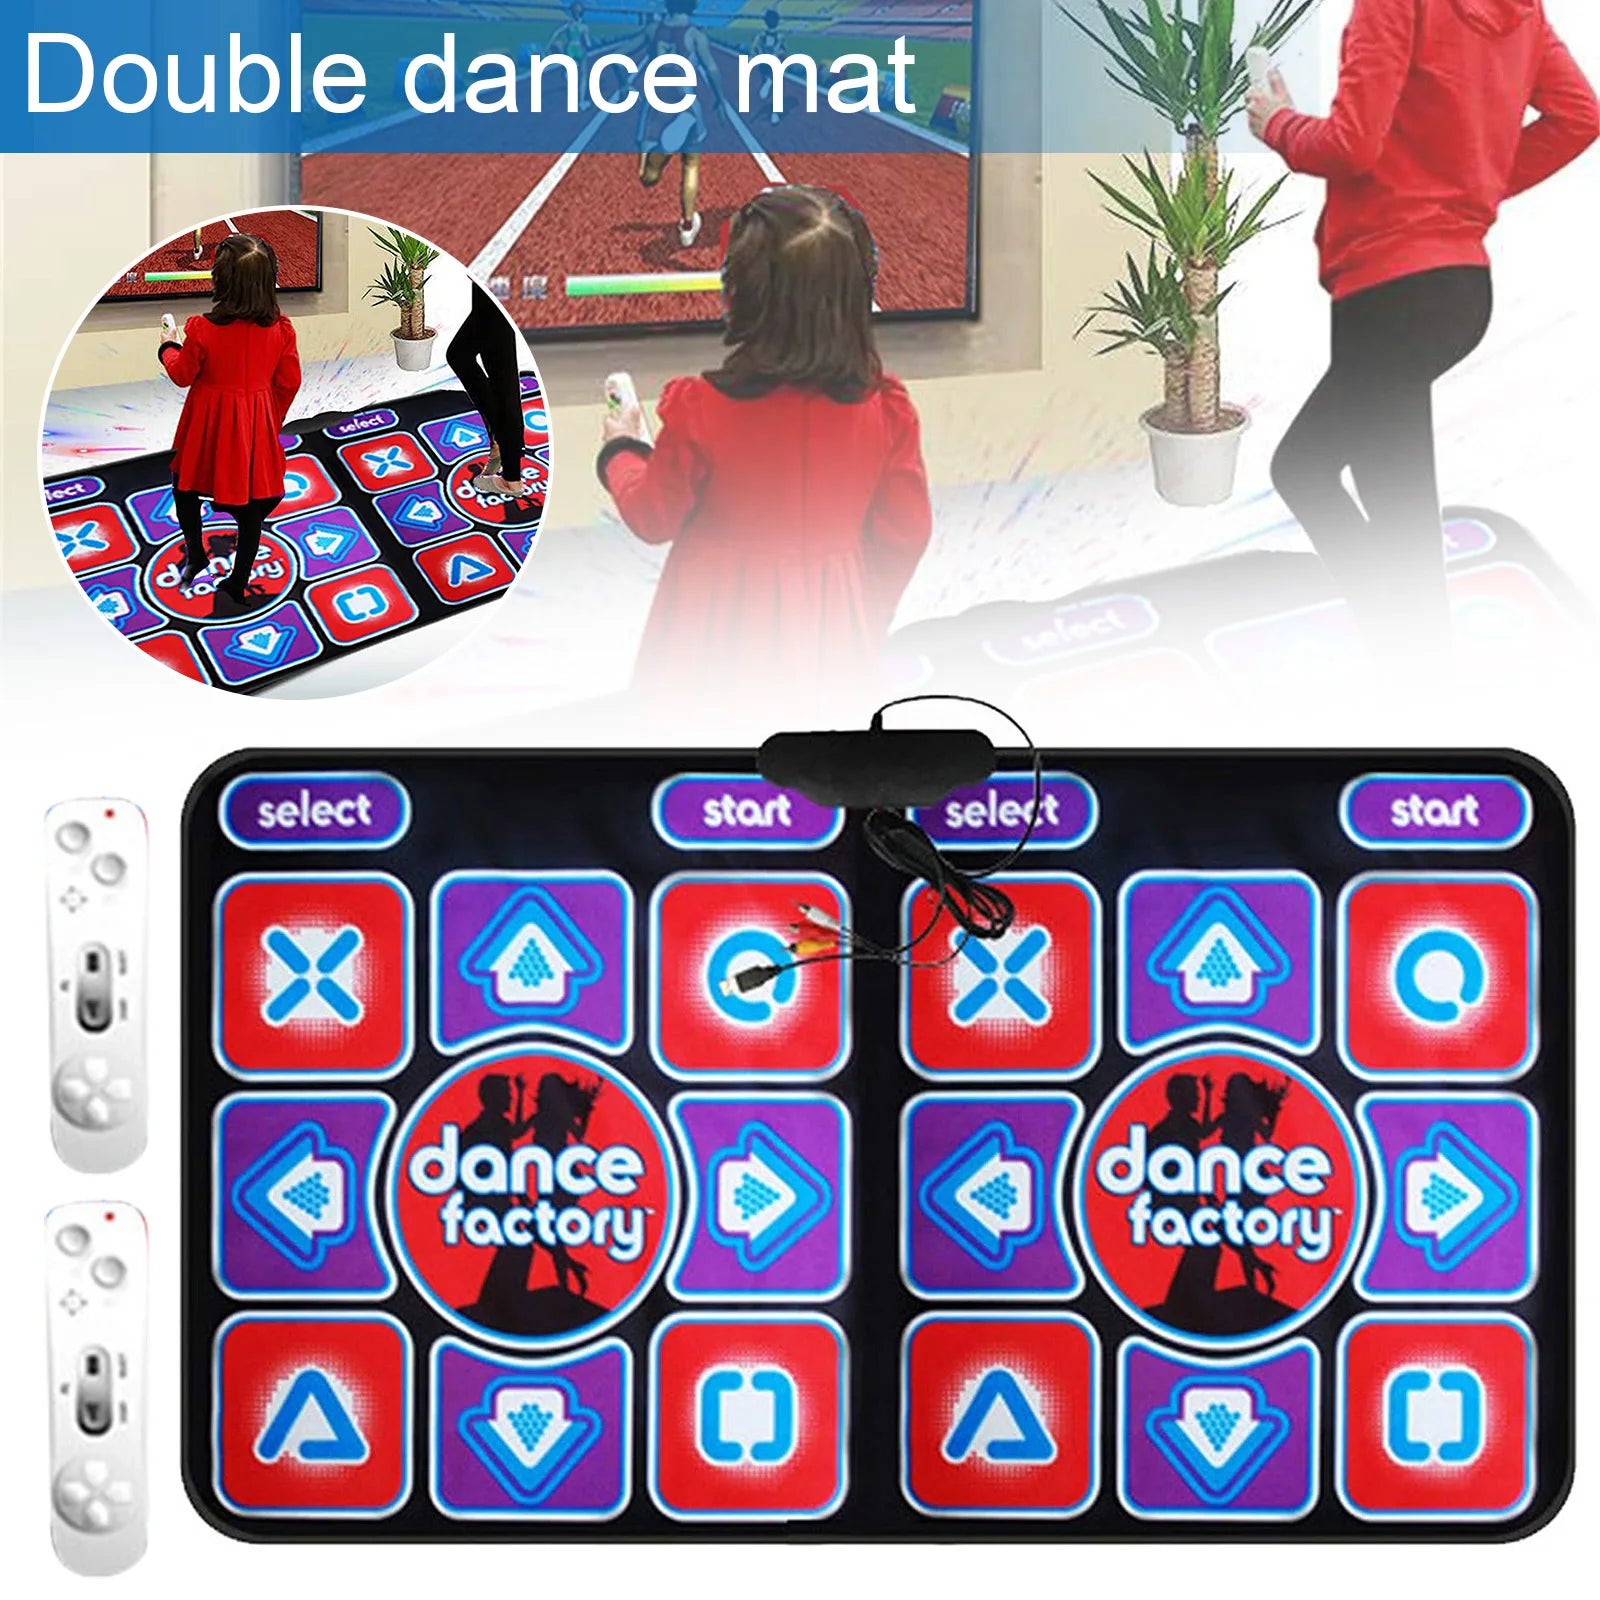 New Dancing Mat Home Indoor Ground Decor Double User Wireless Dance Mat Game With 2 Remote Controller For PC TV Dropshipping